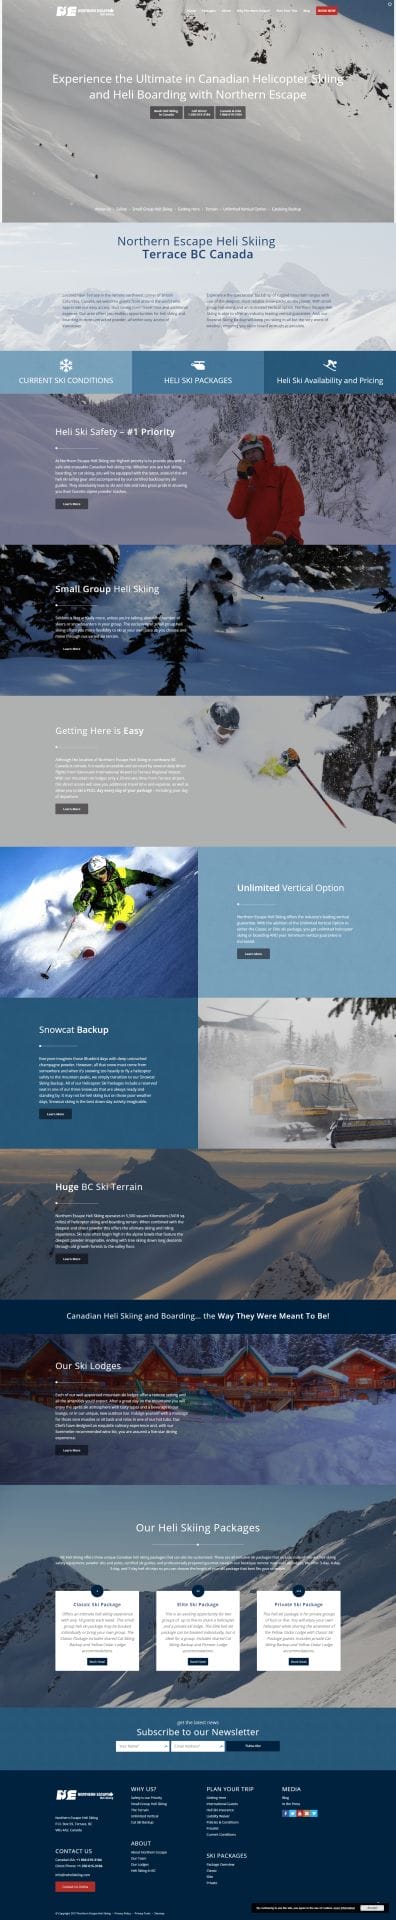 Northern Escape Heli Skiing Website Design home page layout